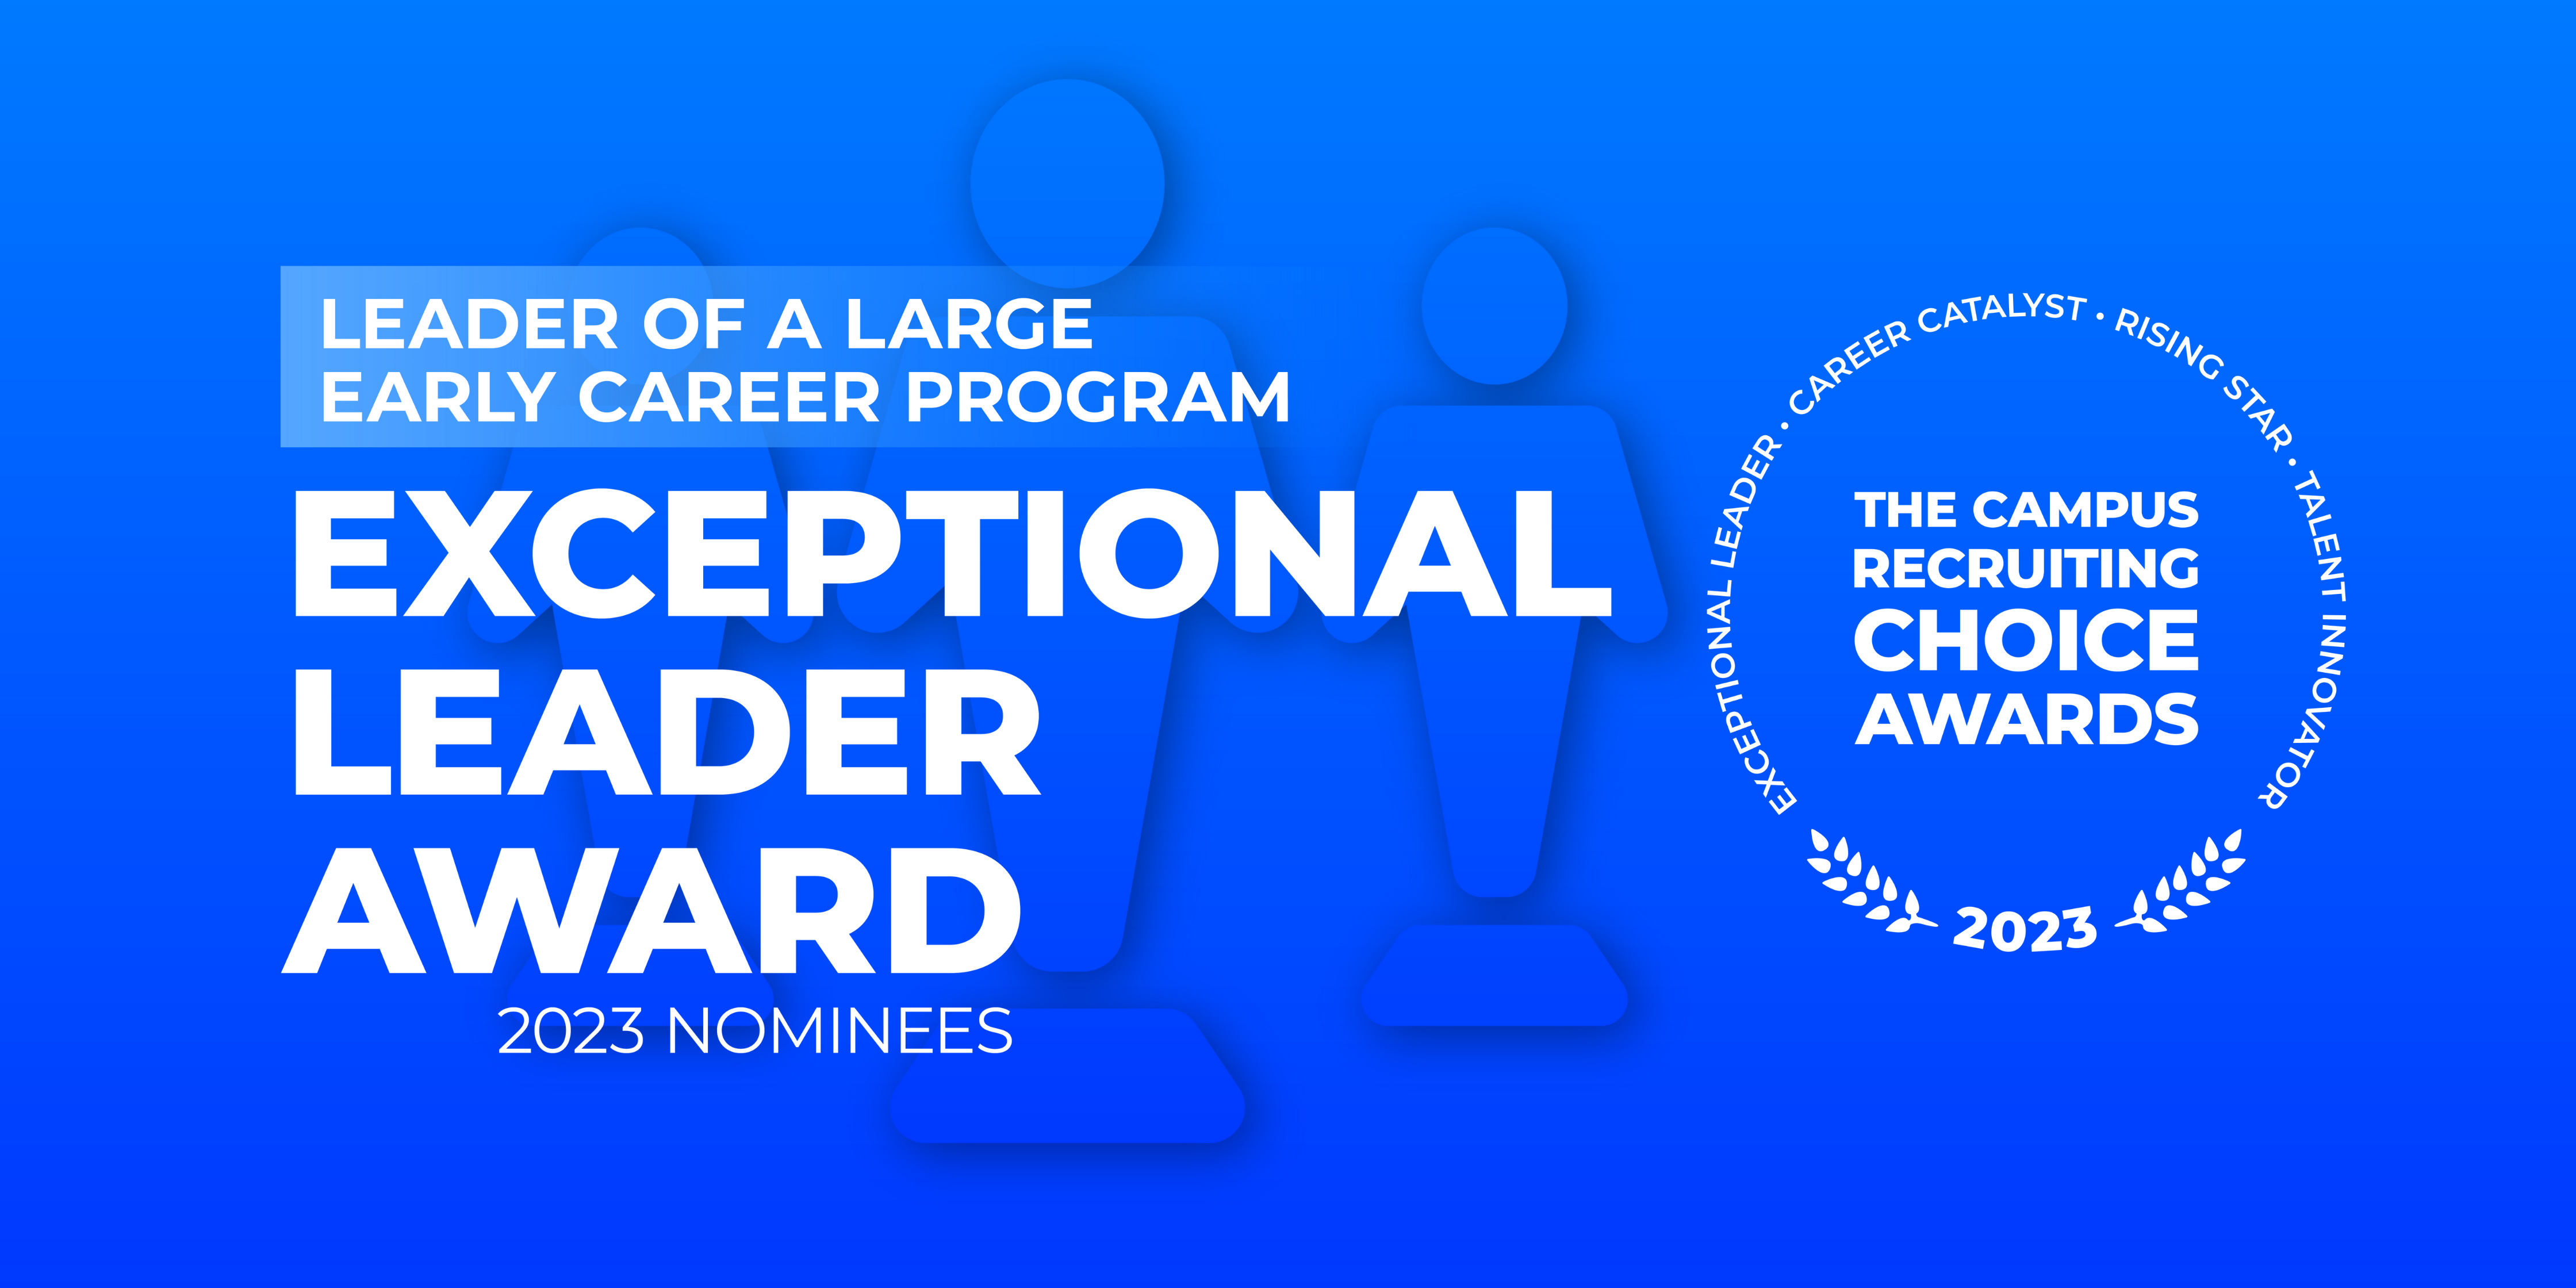 Exceptional Leader Award - Large Early Career Program - 2023 Nominees